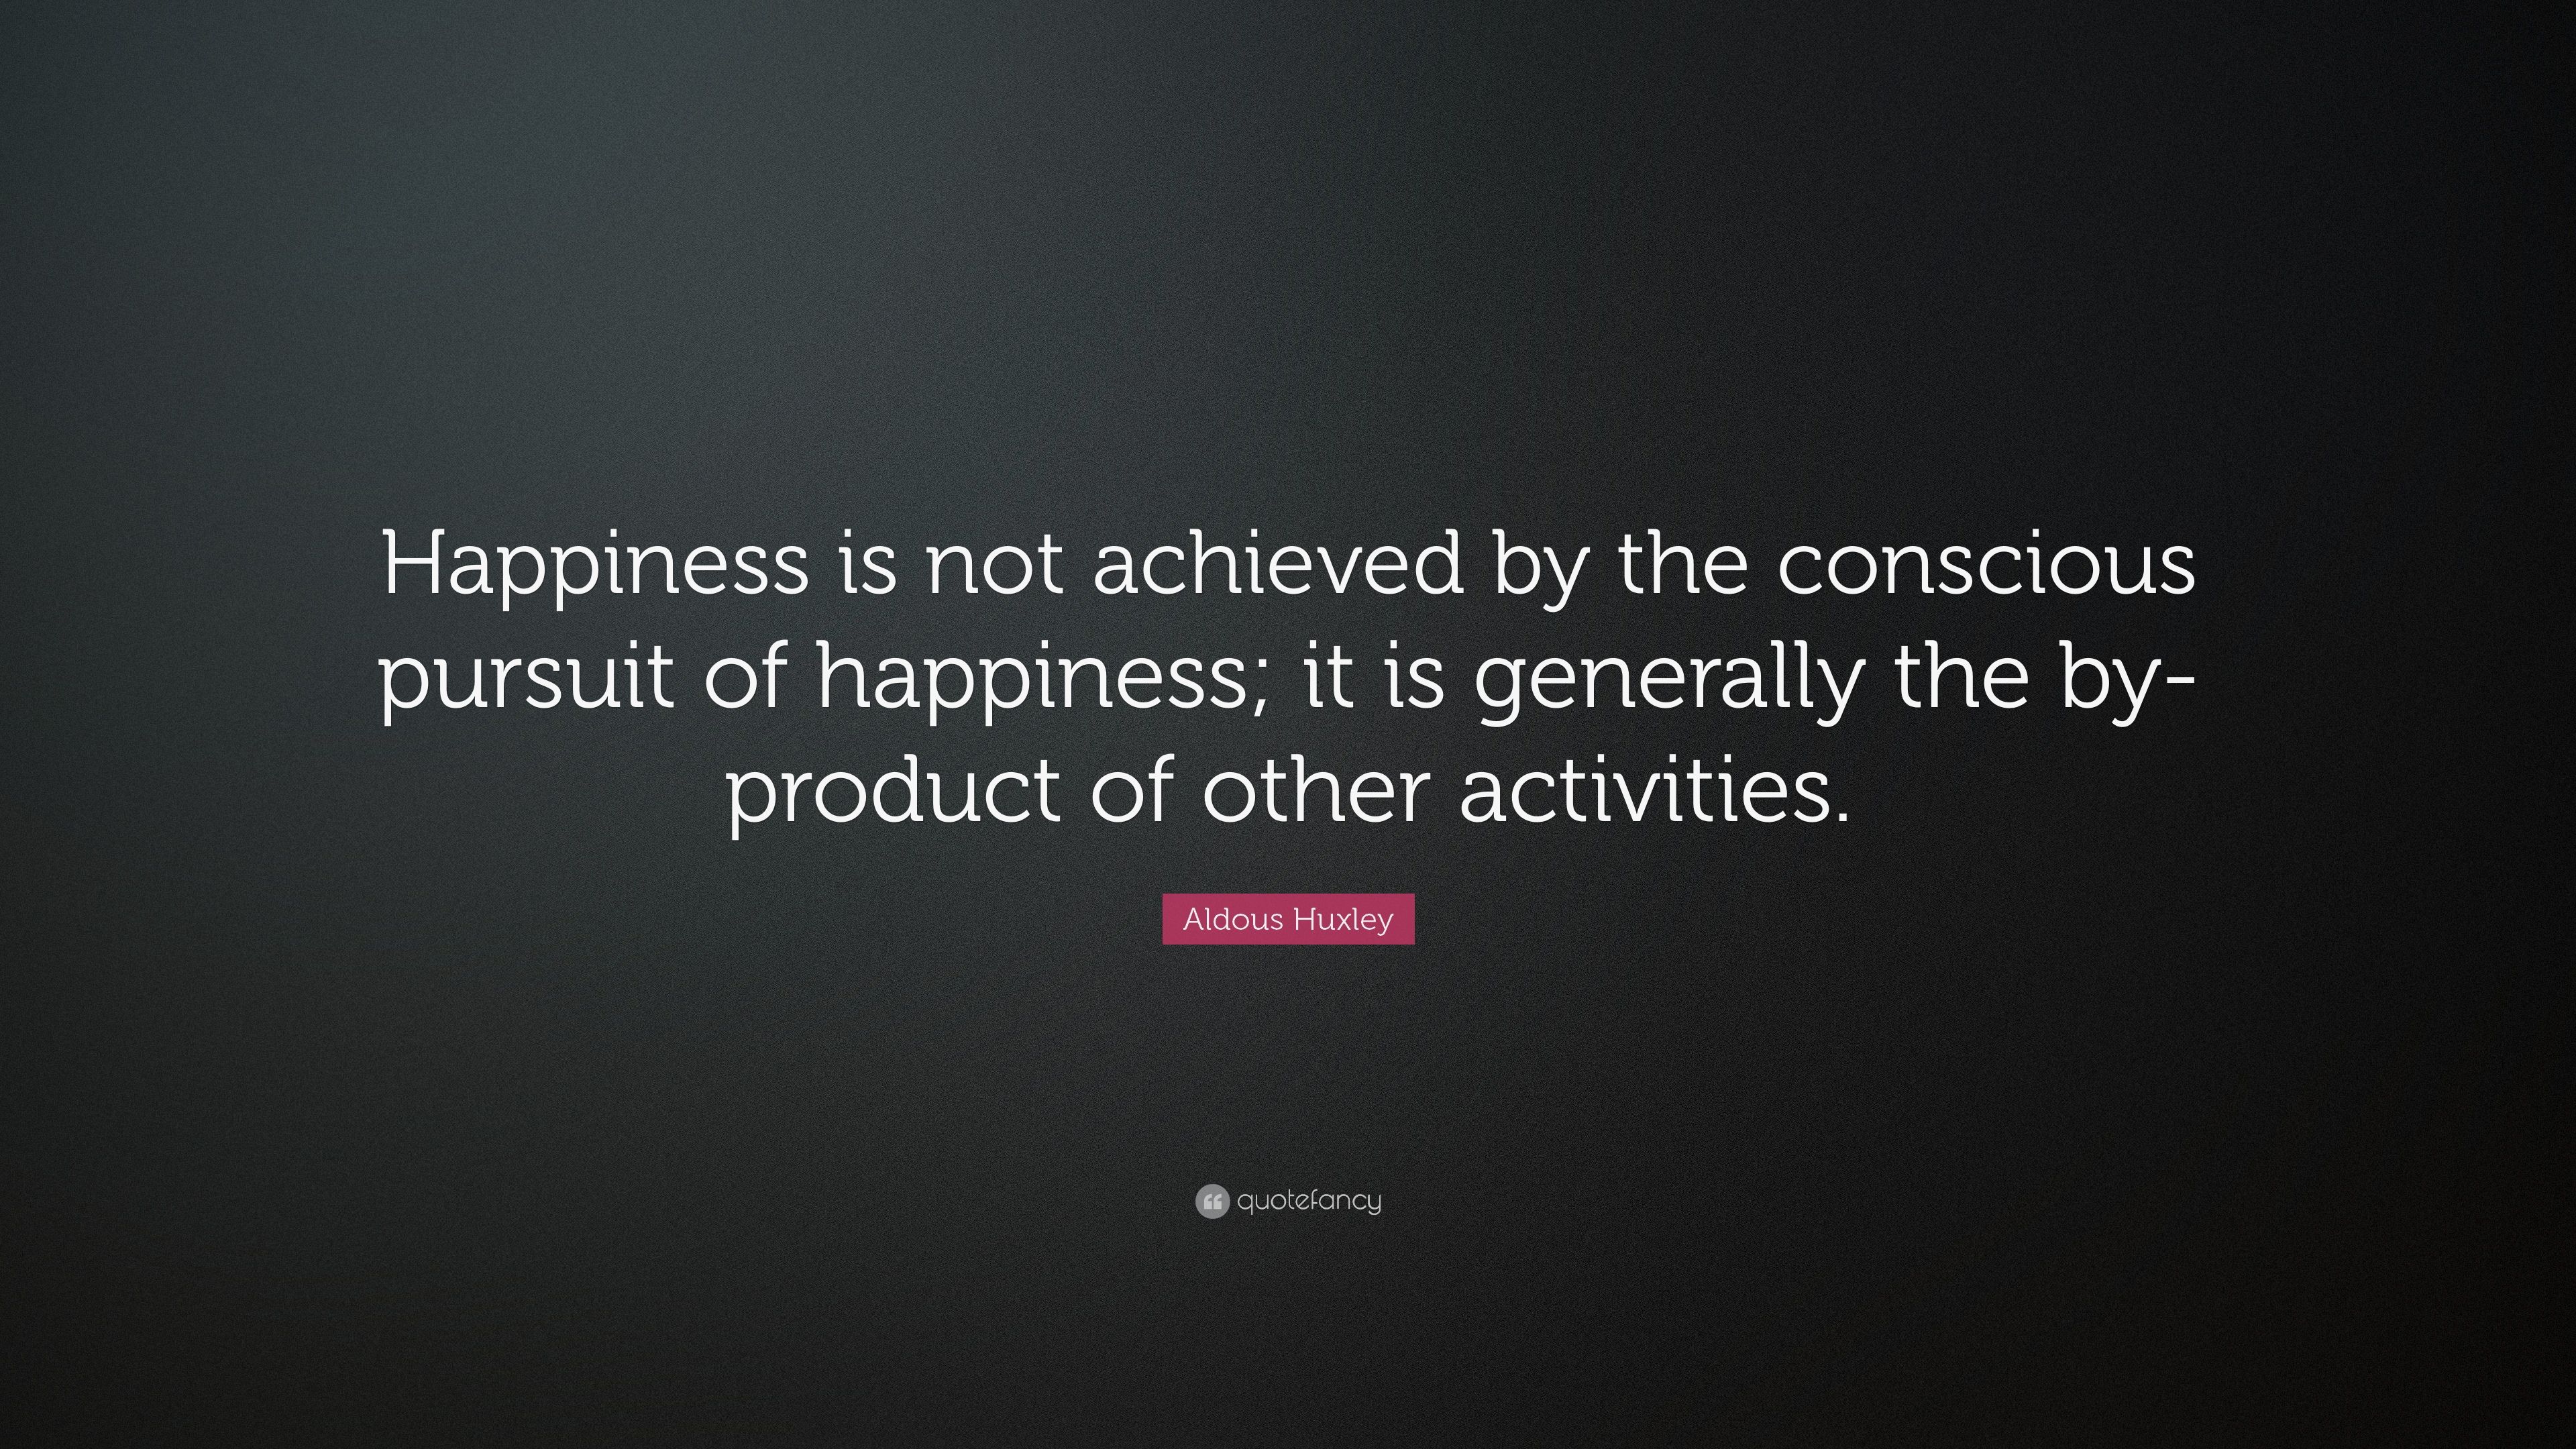 The Pursuit Of Happiness Quote Wallpapers HD - Wallpaper Cave